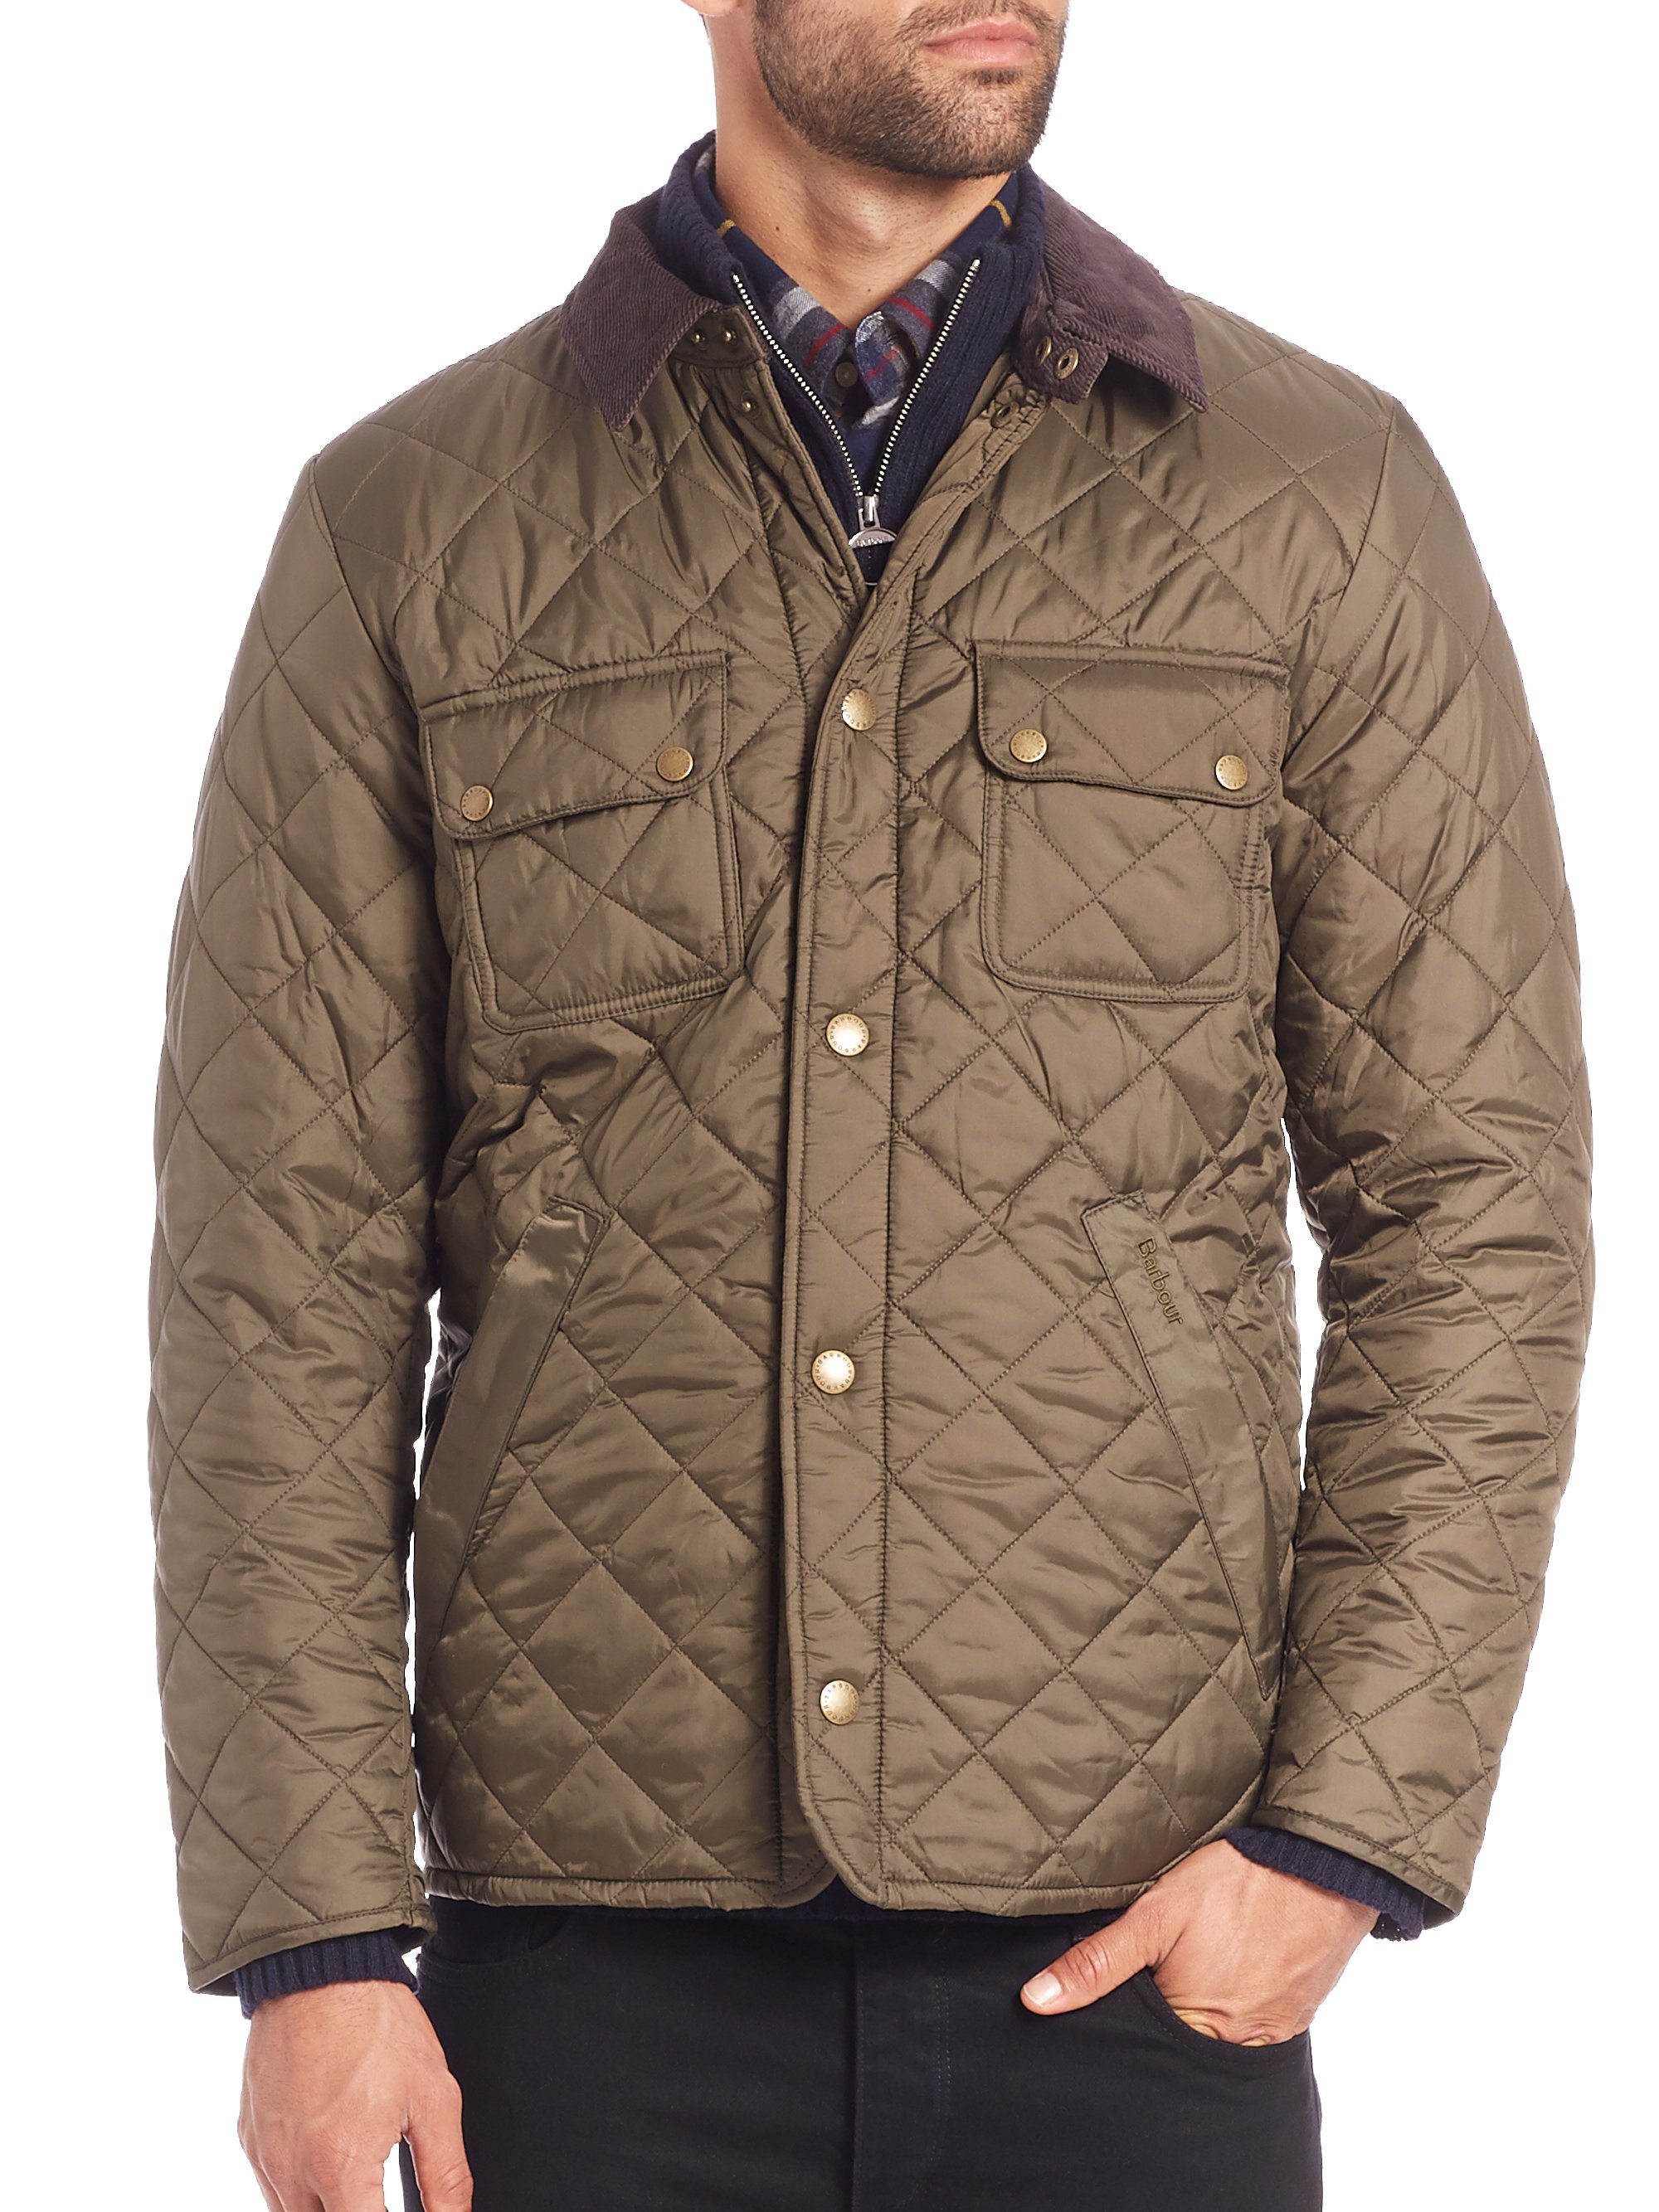 Lyst - Barbour Tinford Quilted Jacket in Green for Men